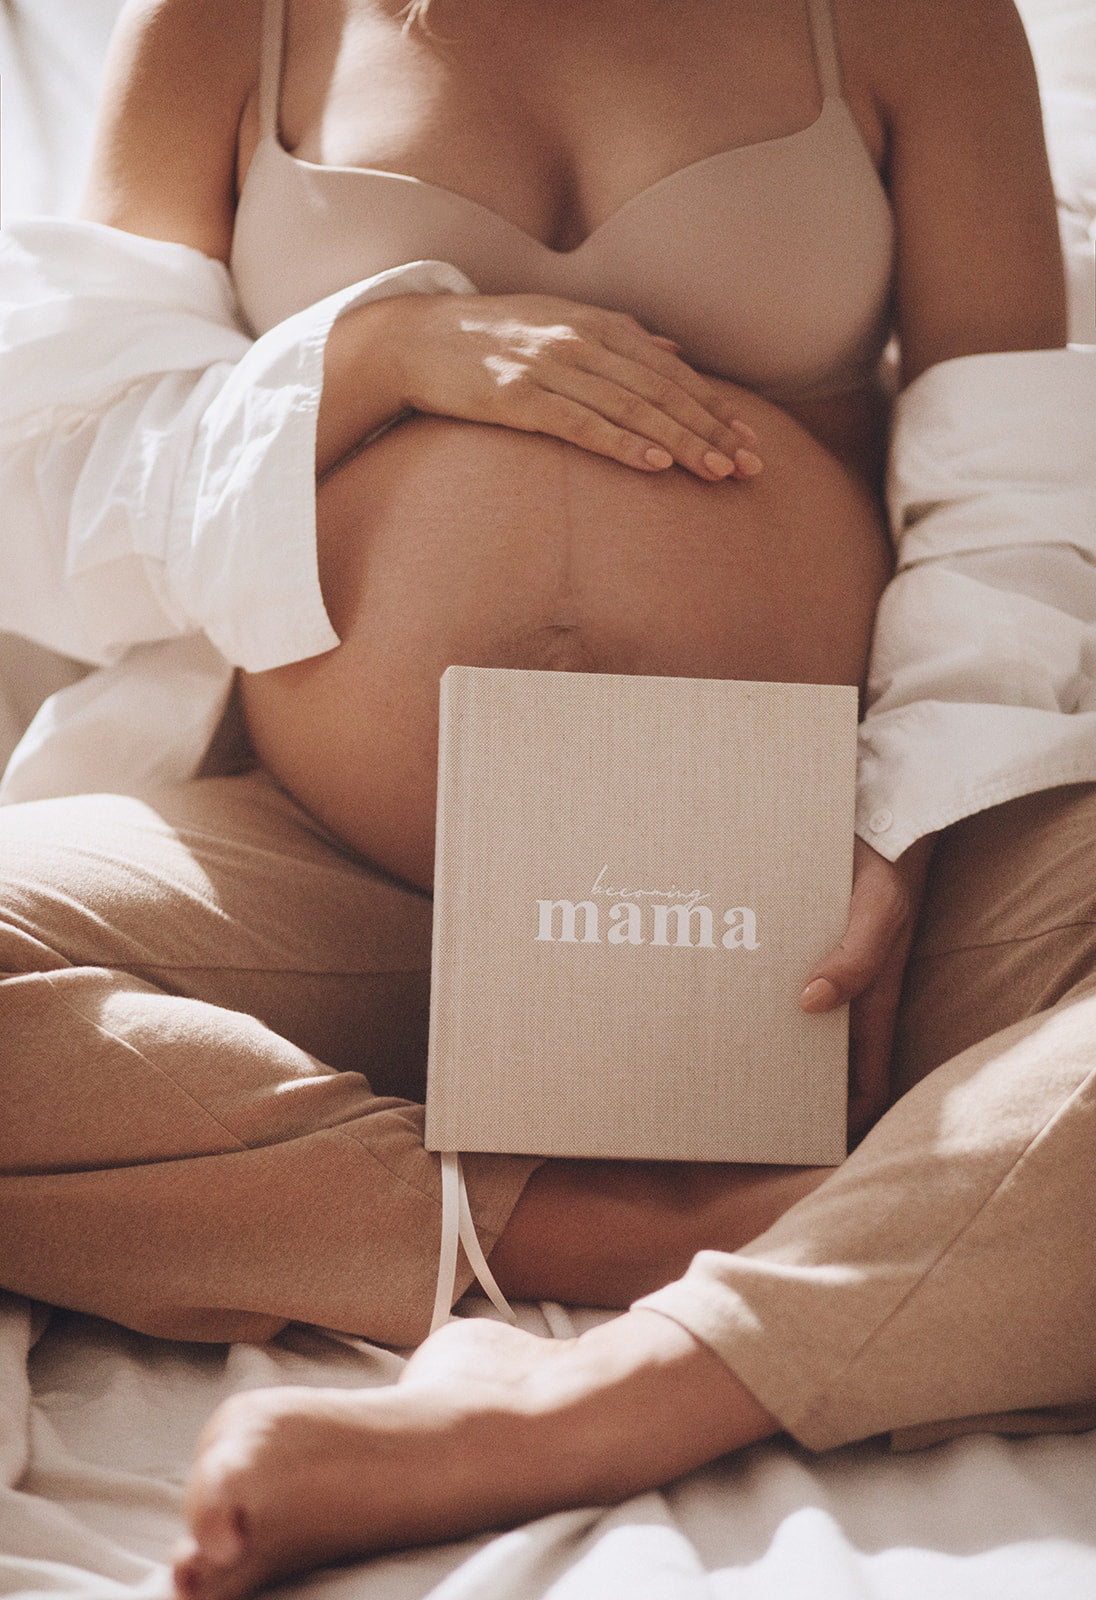 BECOMING MAMA - A PREGNANCY JOURNAL